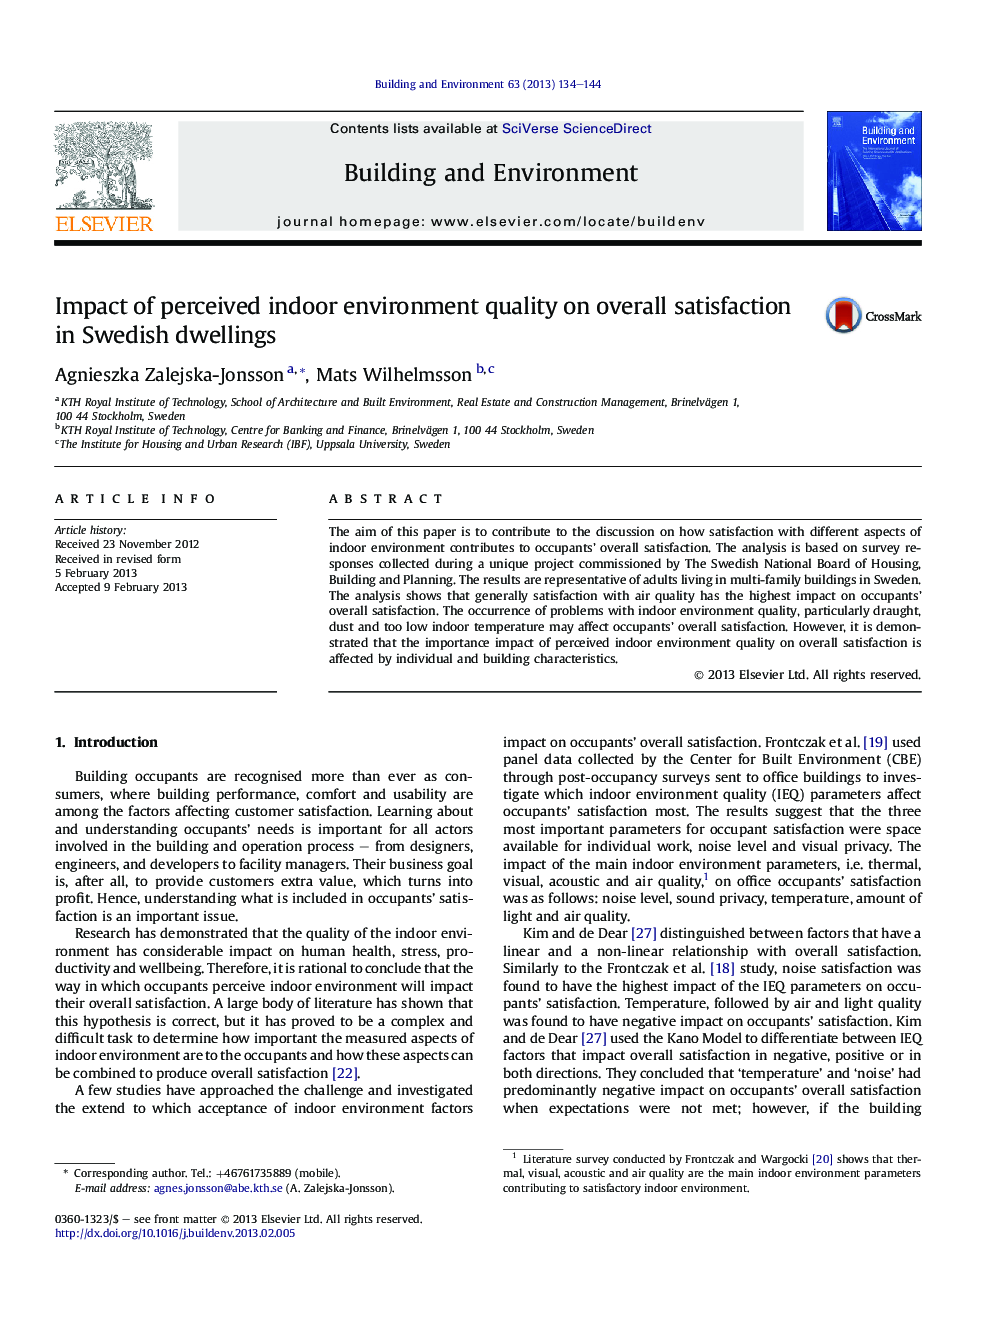 Impact of perceived indoor environment quality on overall satisfaction in Swedish dwellings